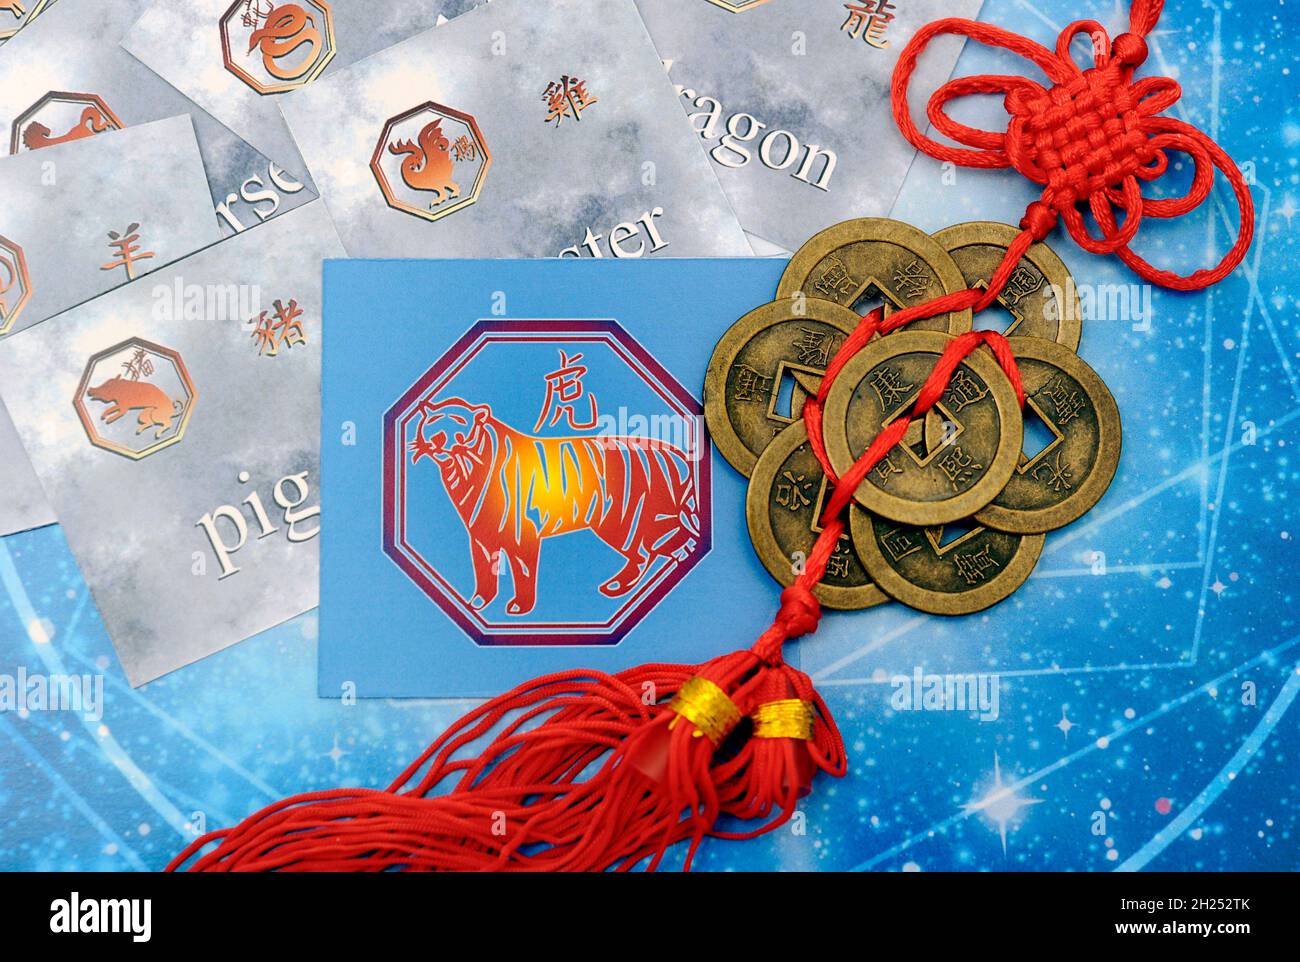 Chinese astrology with the astrological sign of Tiger, year of tiger concept Stock Photo